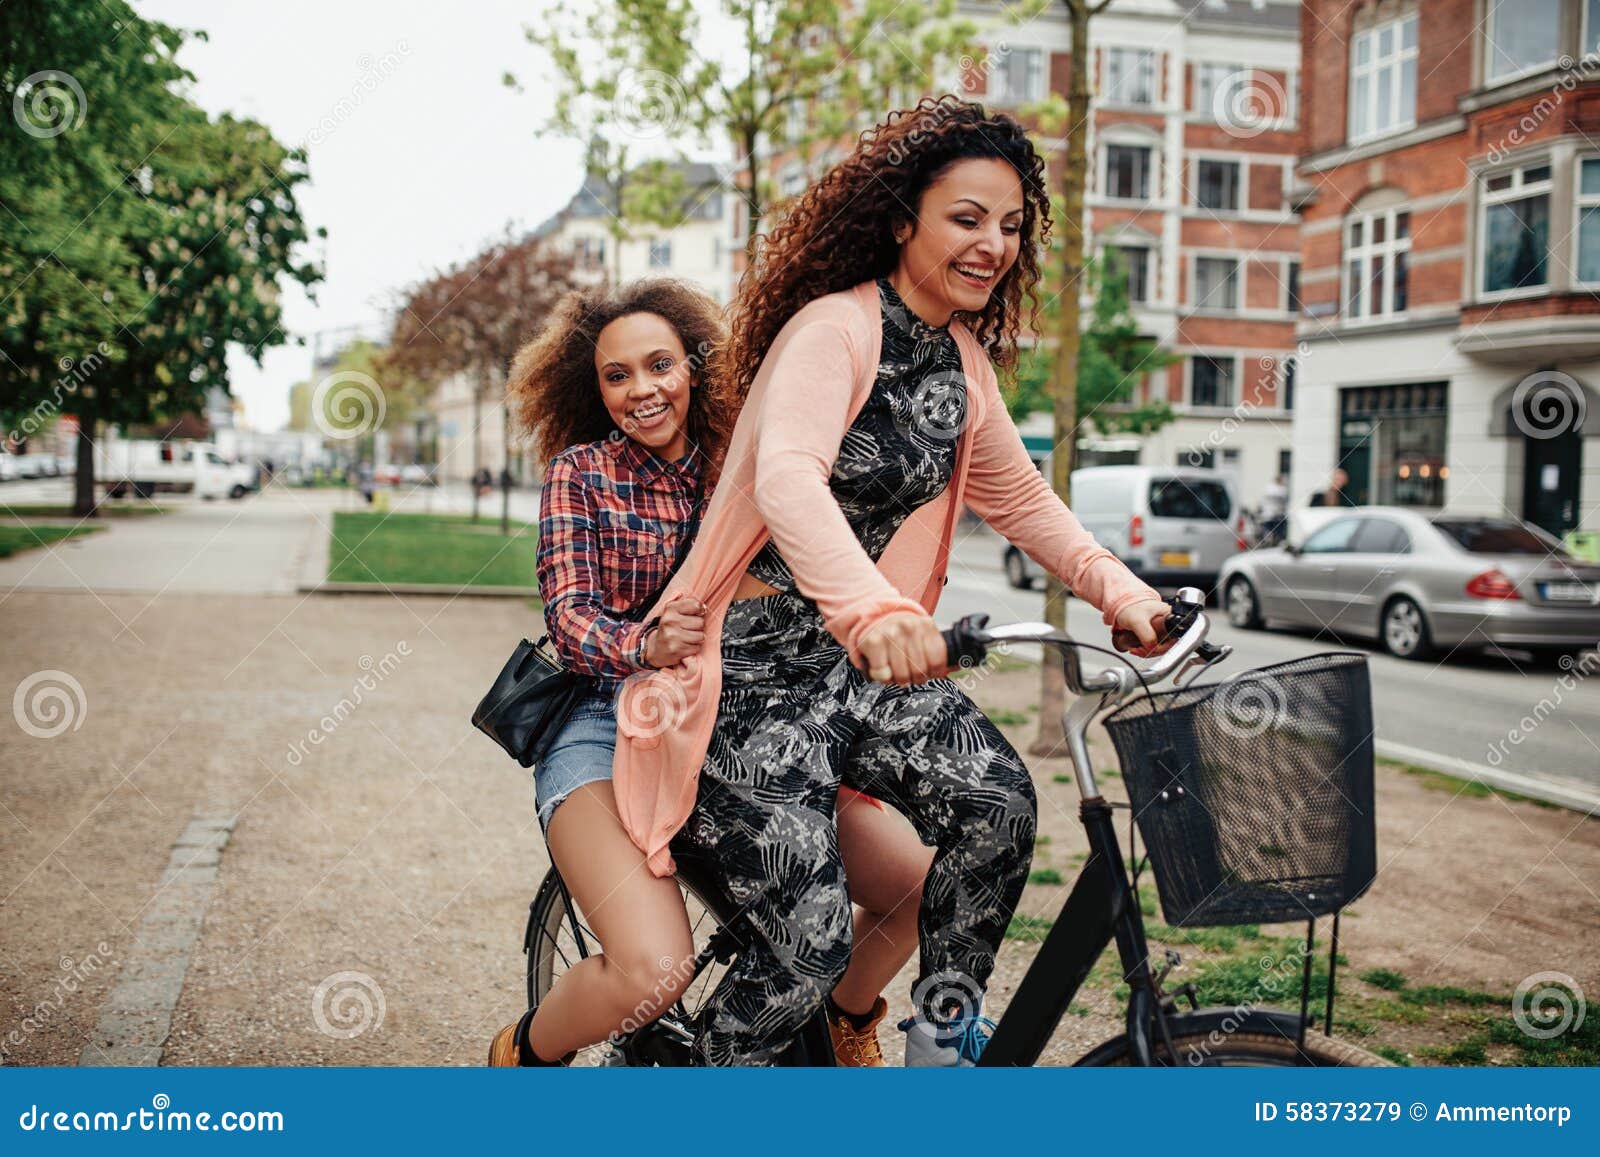 Young Women Enjoying Bicycle Ride on City Street Stock Image - Young Women Enjoying Bicycle RiDe City Street Cheerful Two Girls Together RiDing One 58373279